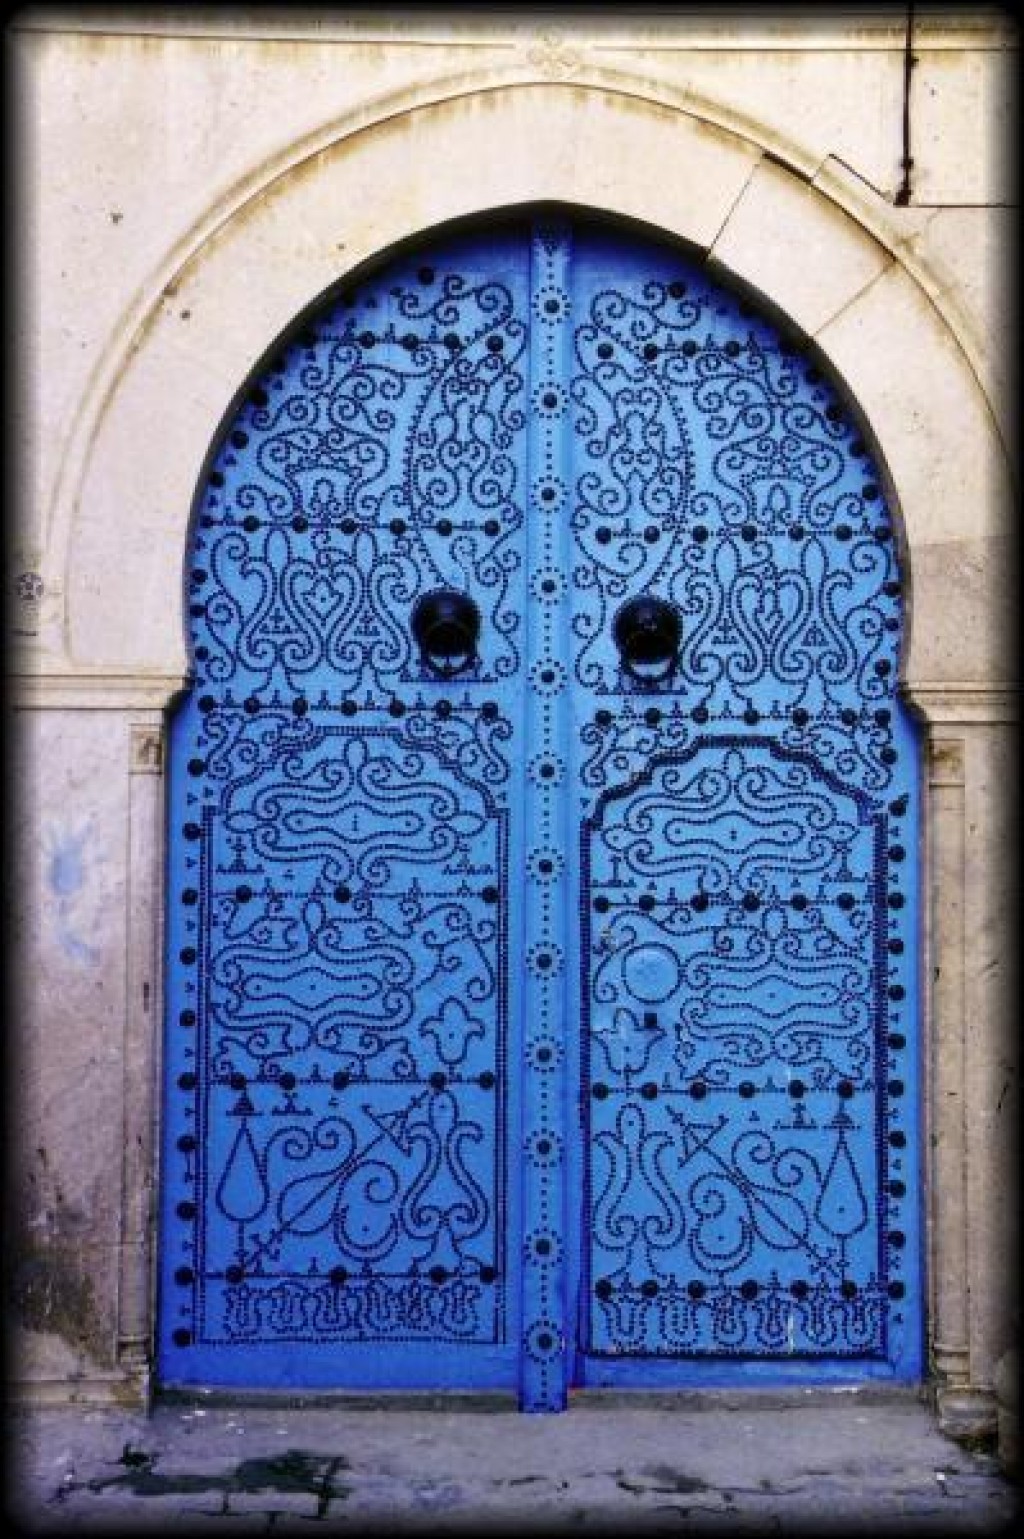 Tunisia is known for it's intricately carved doors.  The door is often the centerpiece of the house.